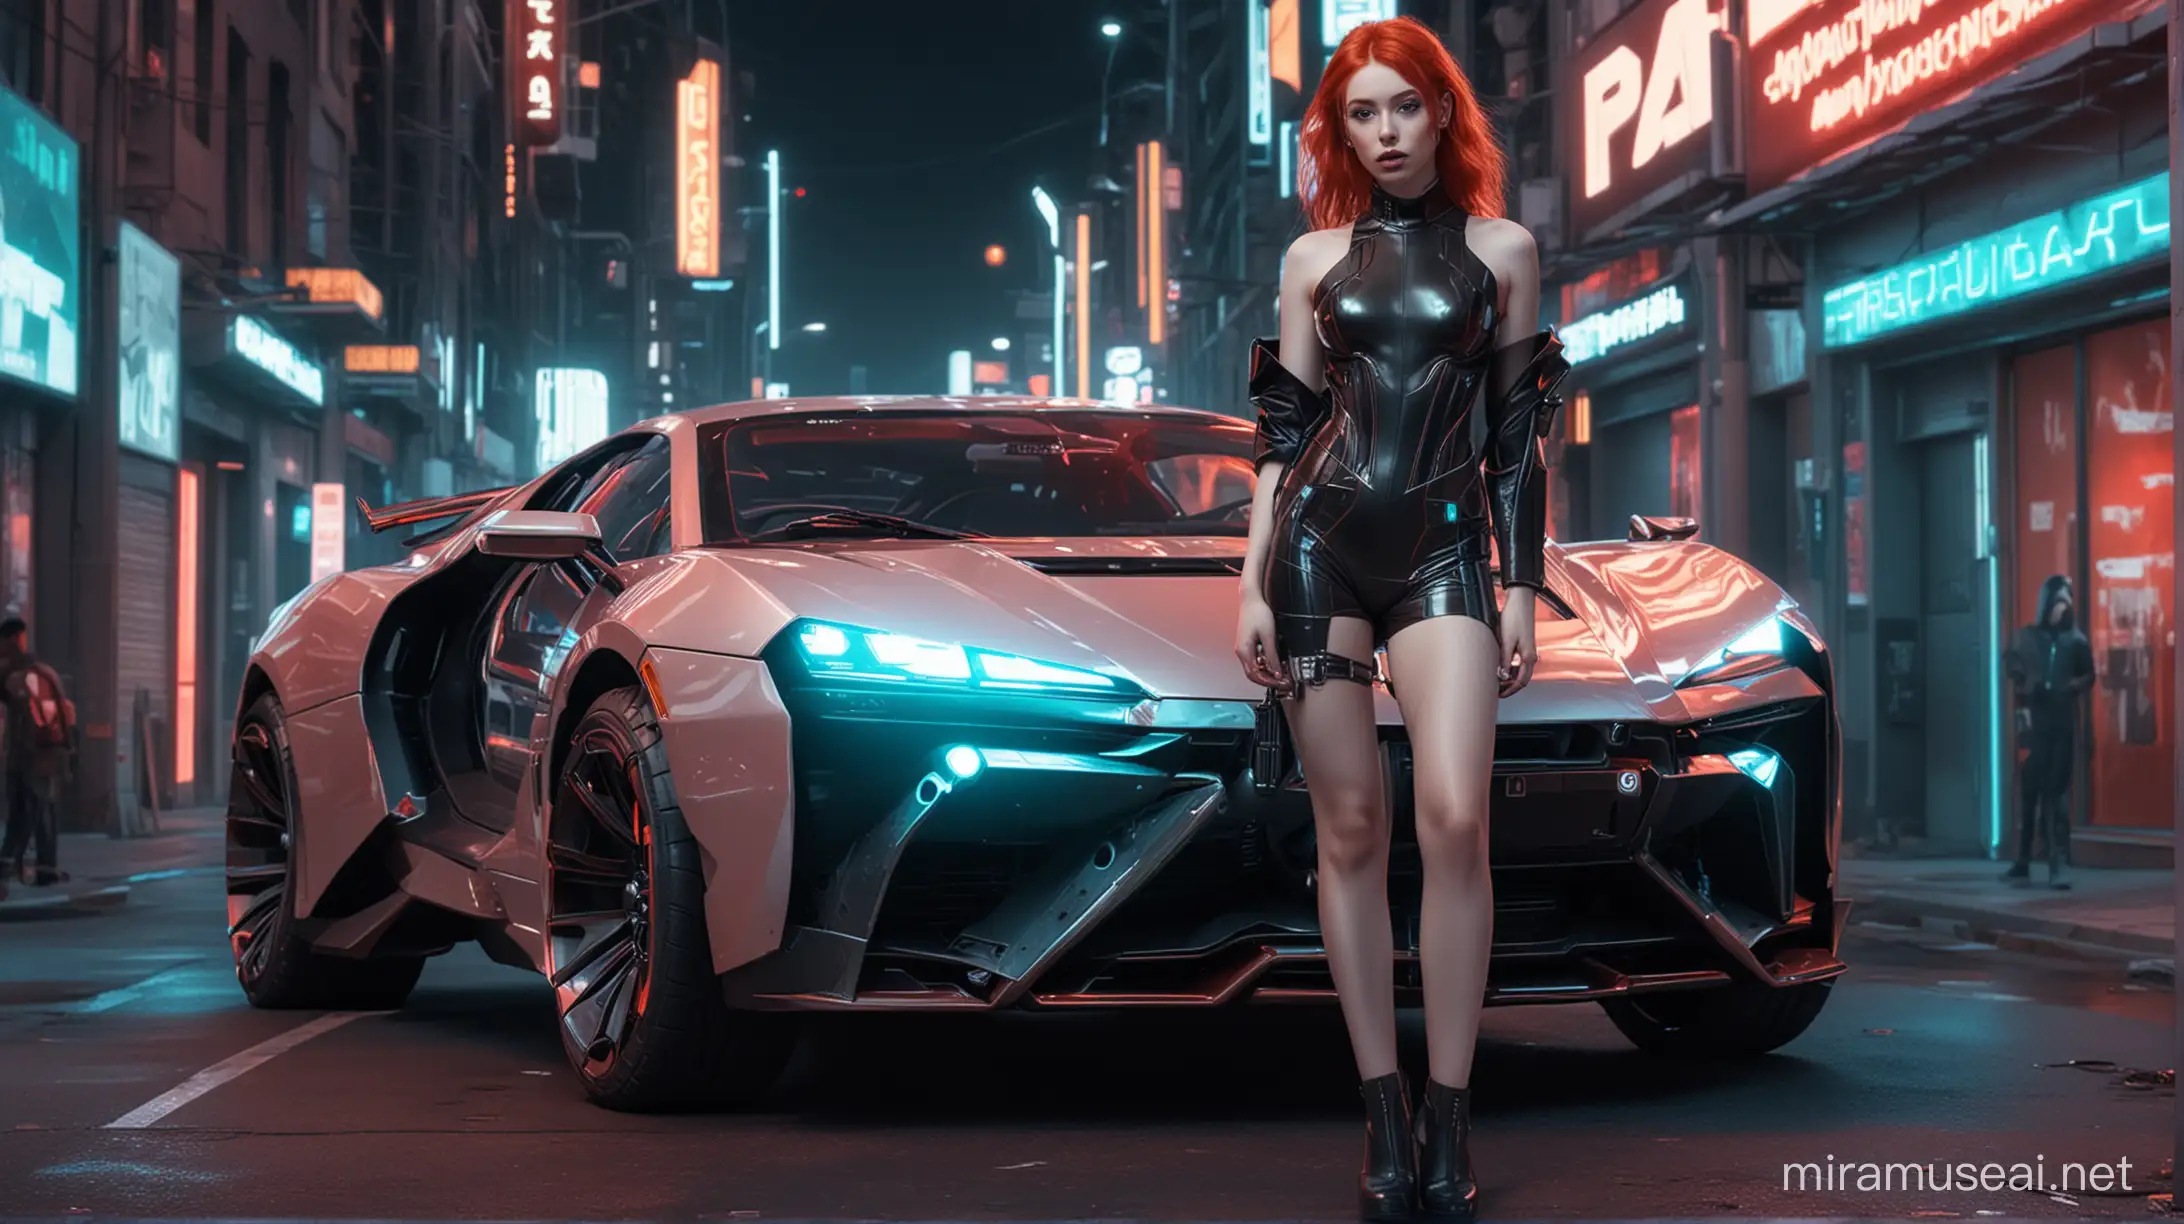 Fashionable Girl with Futuristic Style, pale skin and red hair by a Cyberpunk Car on a neon lit street